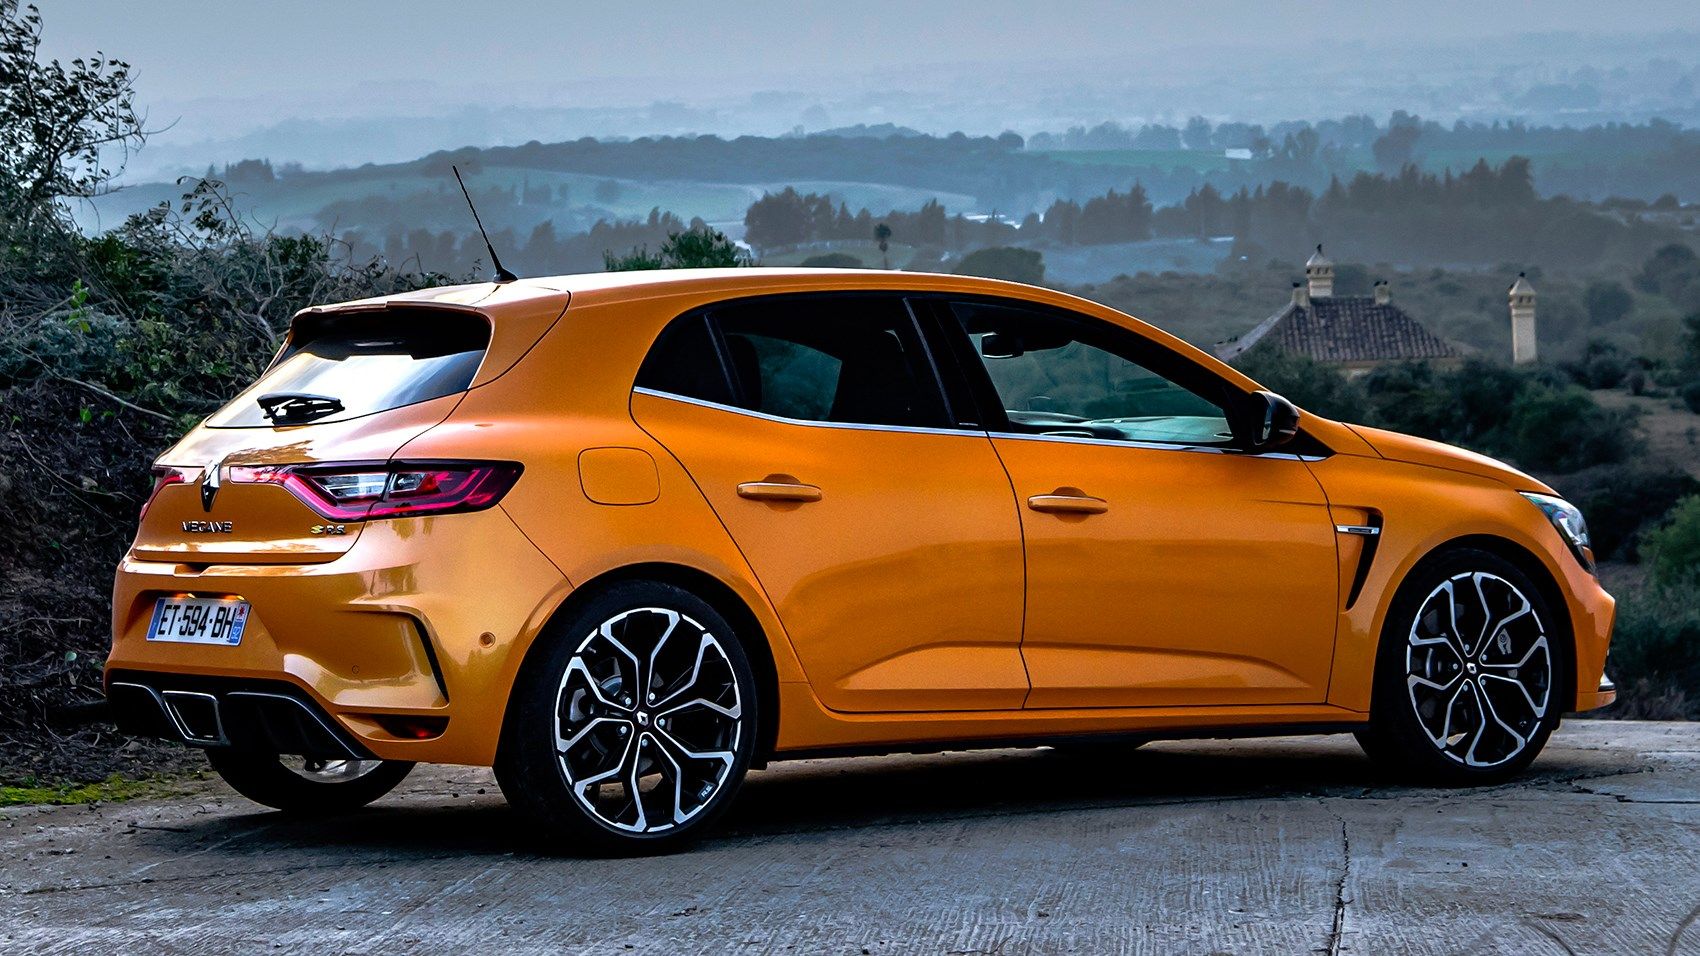 Megane RS side view